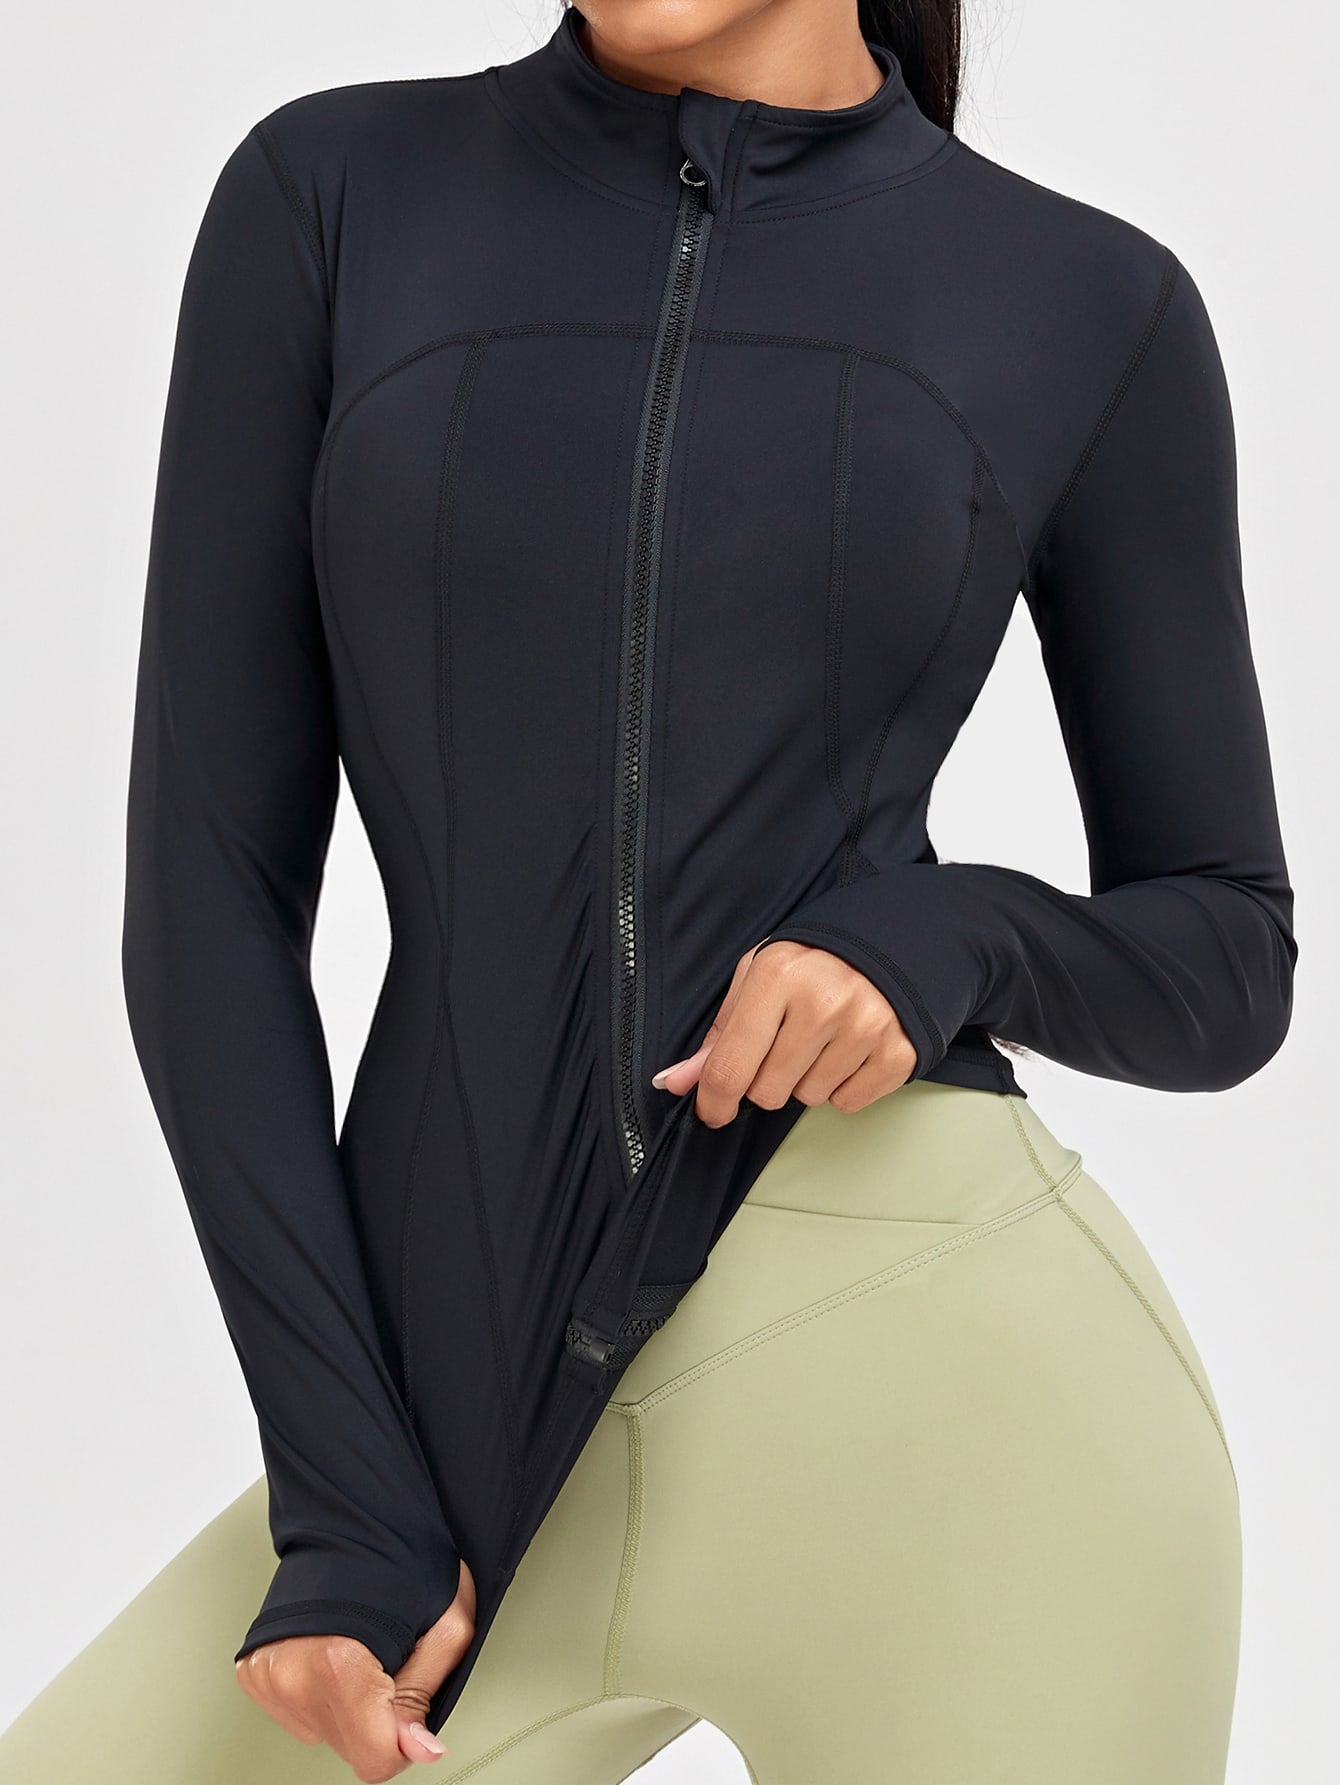 Stay Stylish and Comfortable: Women's Slim Fit Sports Jacket with Thumb Holes